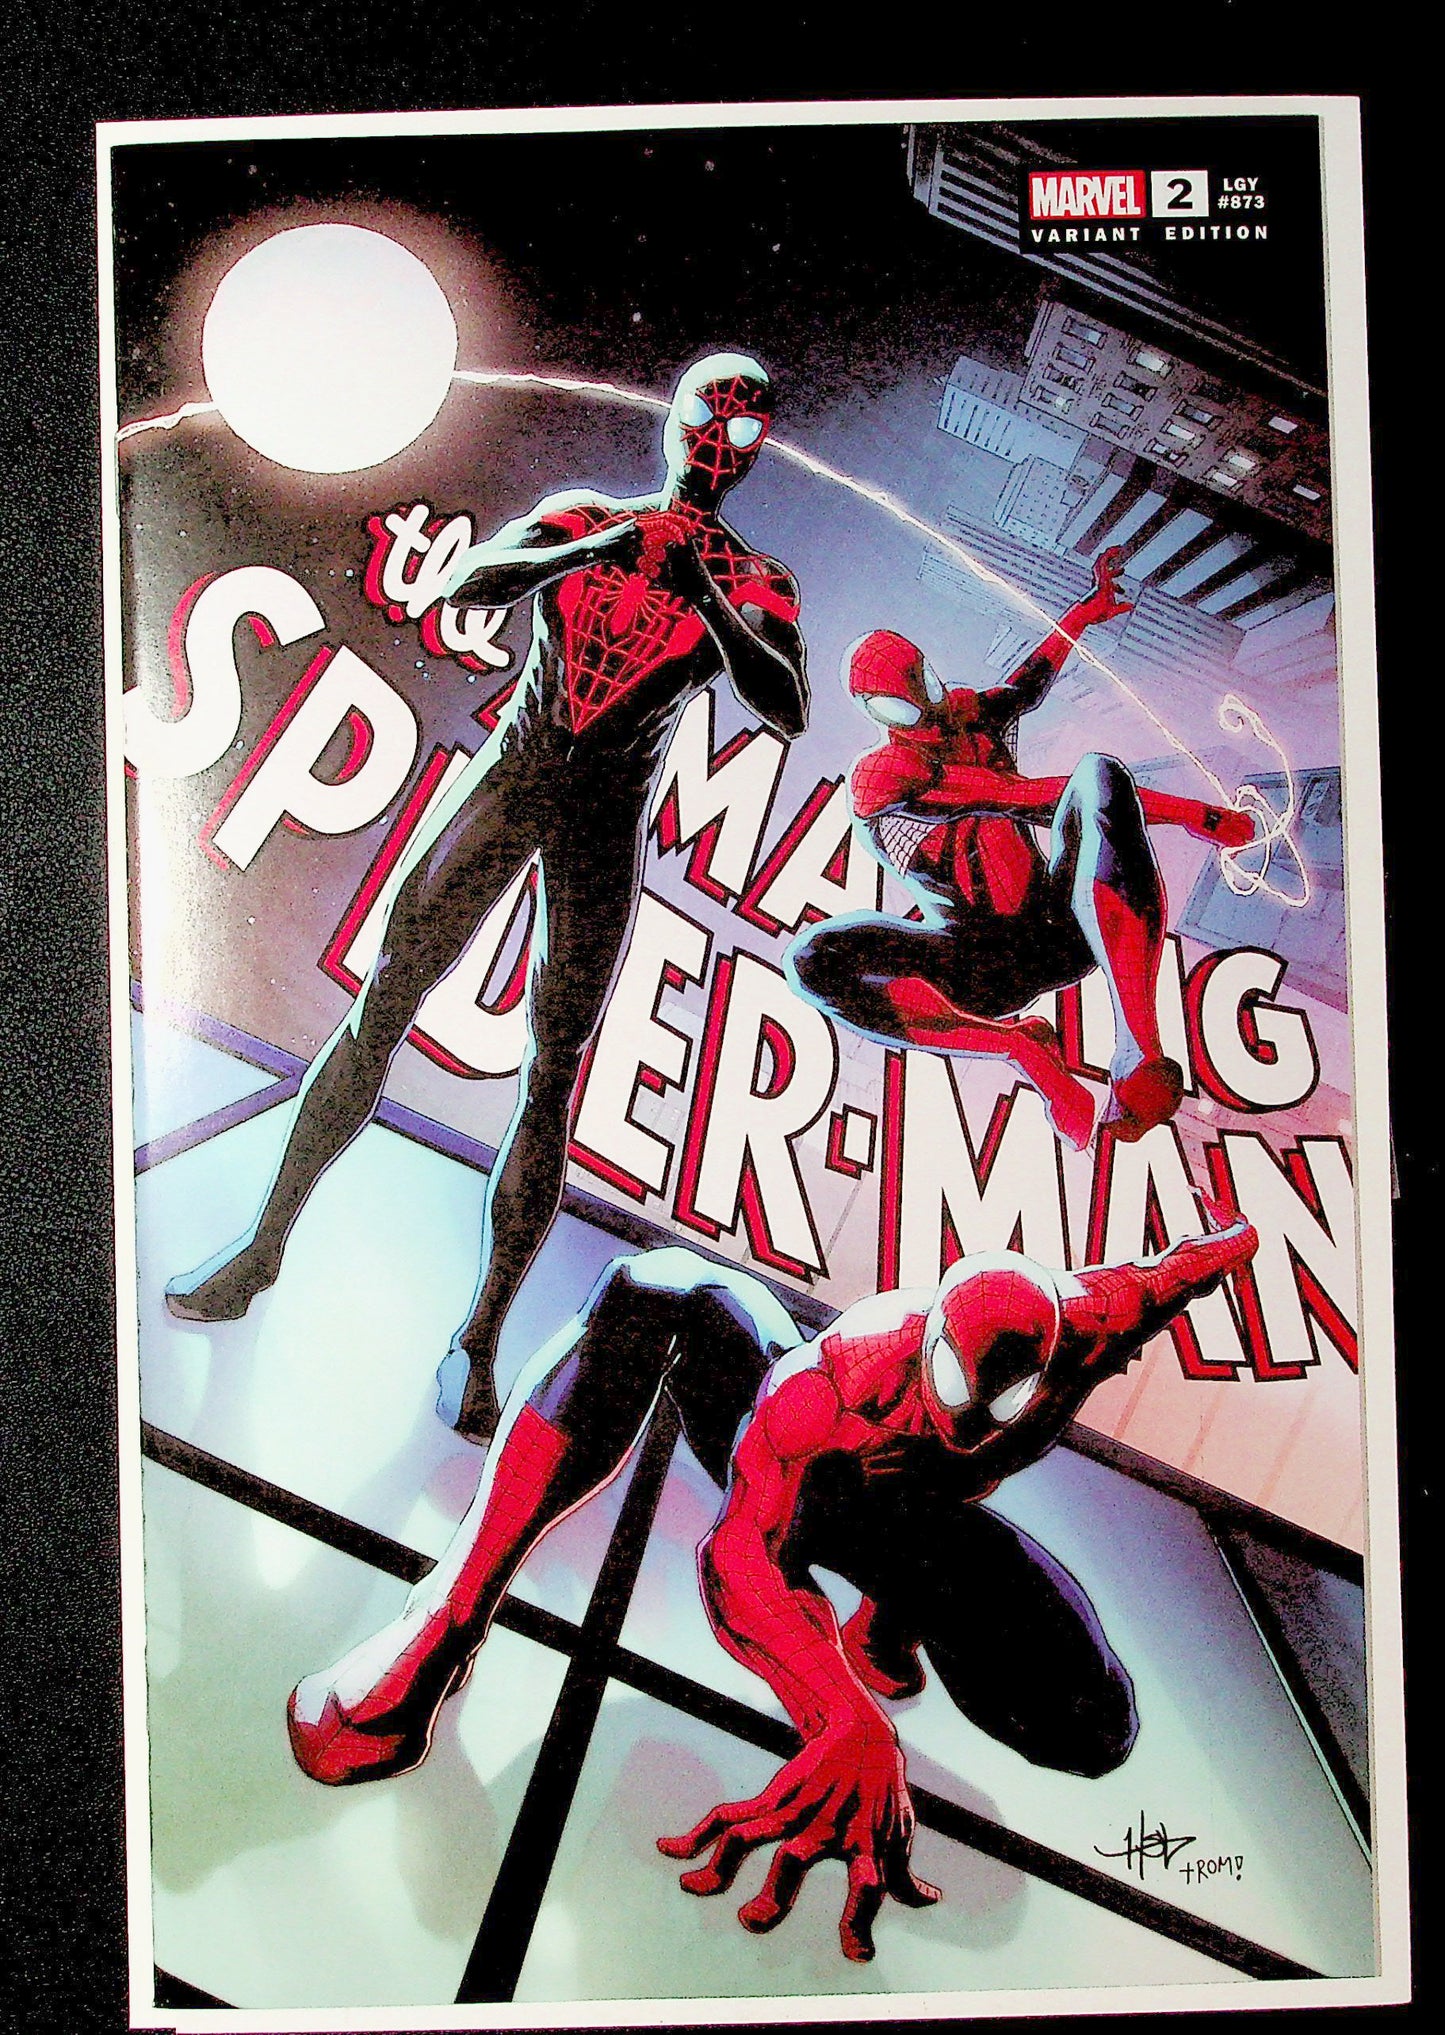 AMAZING SPIDER-MAN #2 - CREEES HYUNSUNG LEE VARIANT EXCLUSIVE